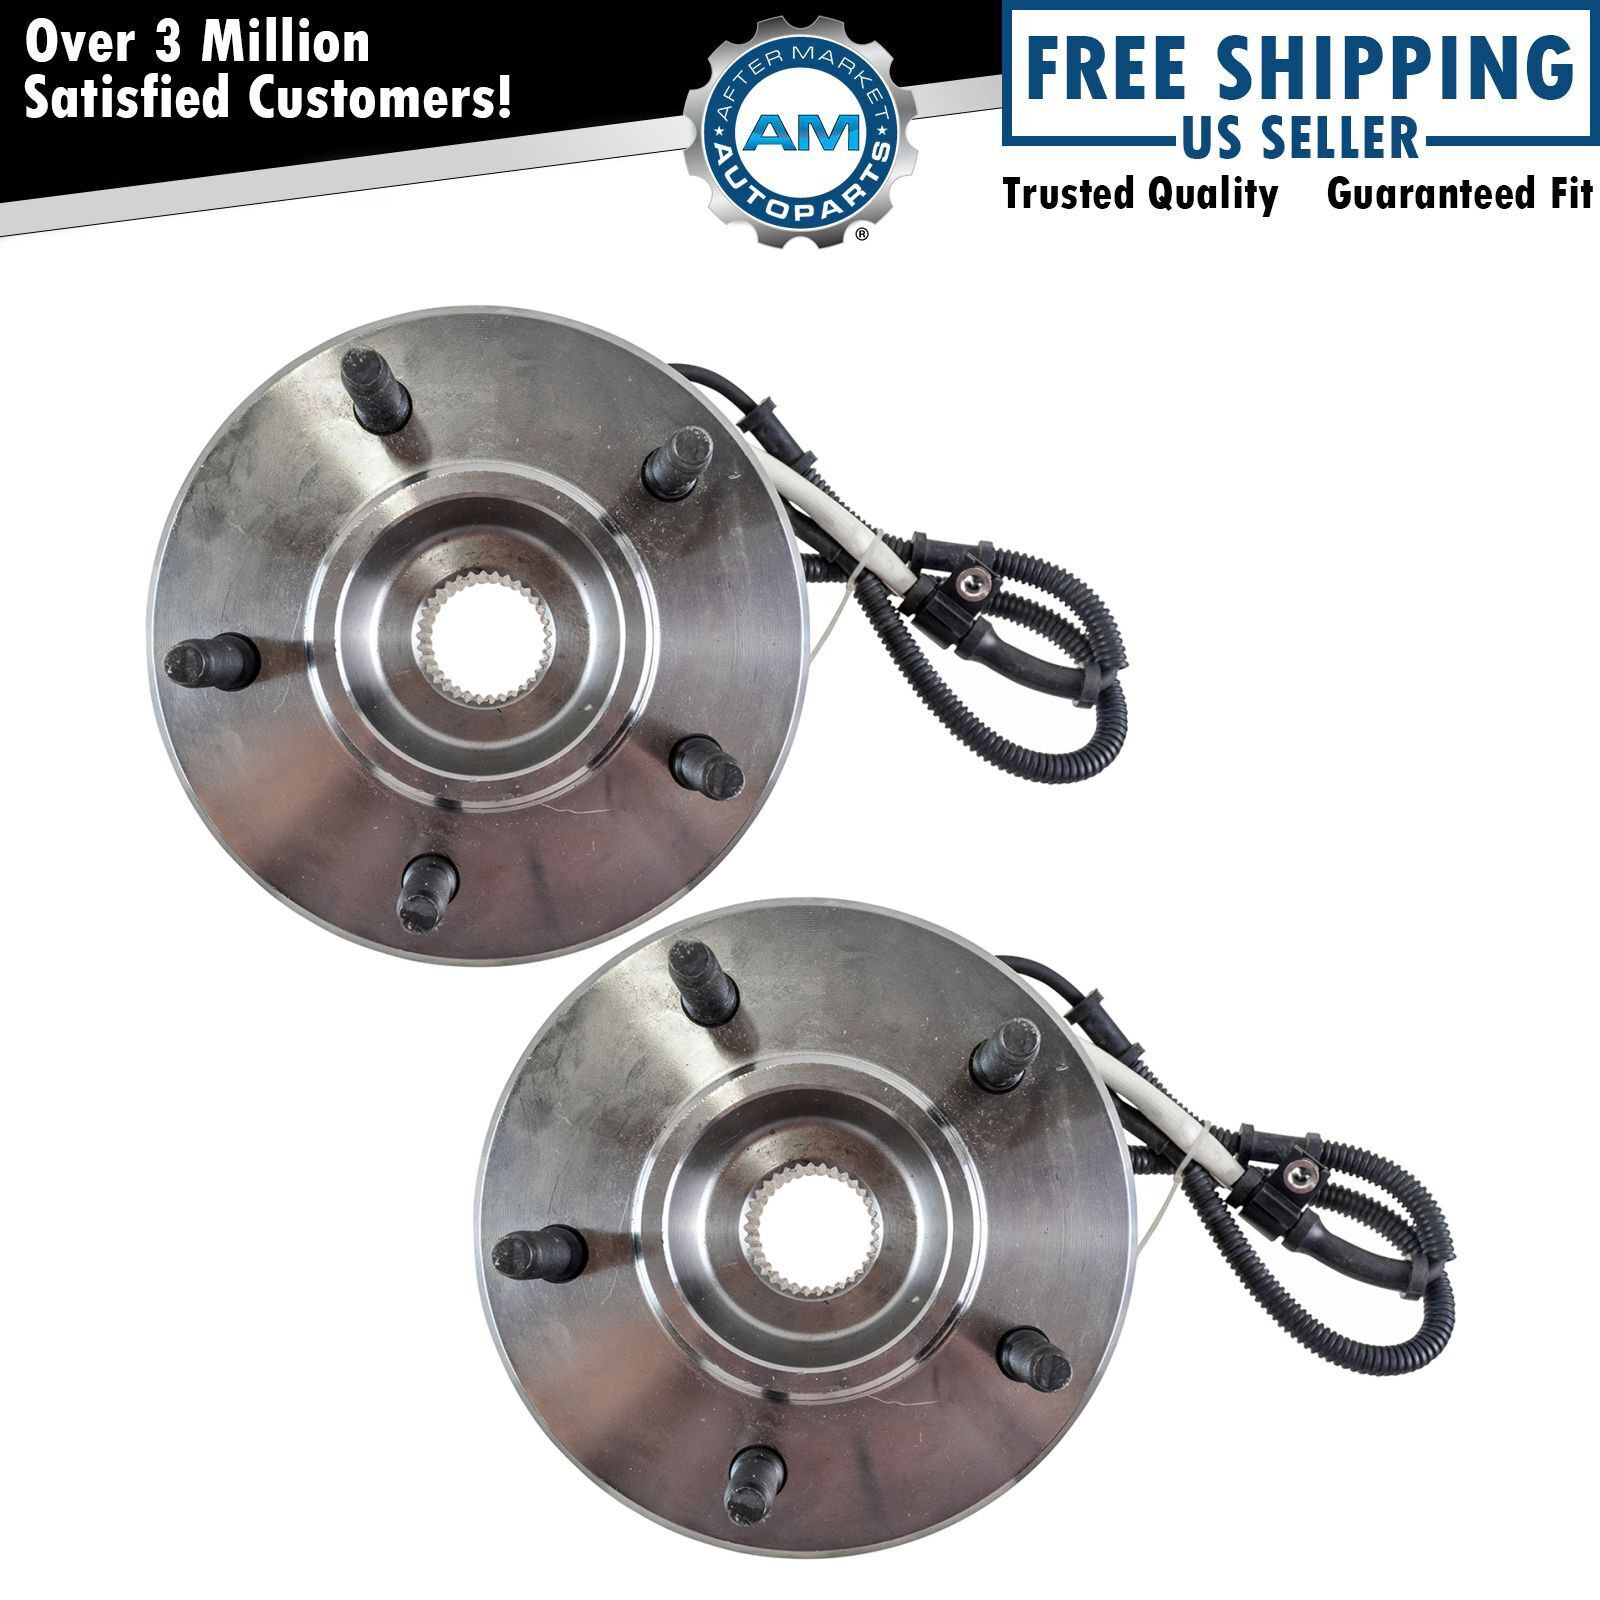 Front Wheel Hub & Bearing 4WD 4x4 w/ ABS Pair Set for Expedition Navigator